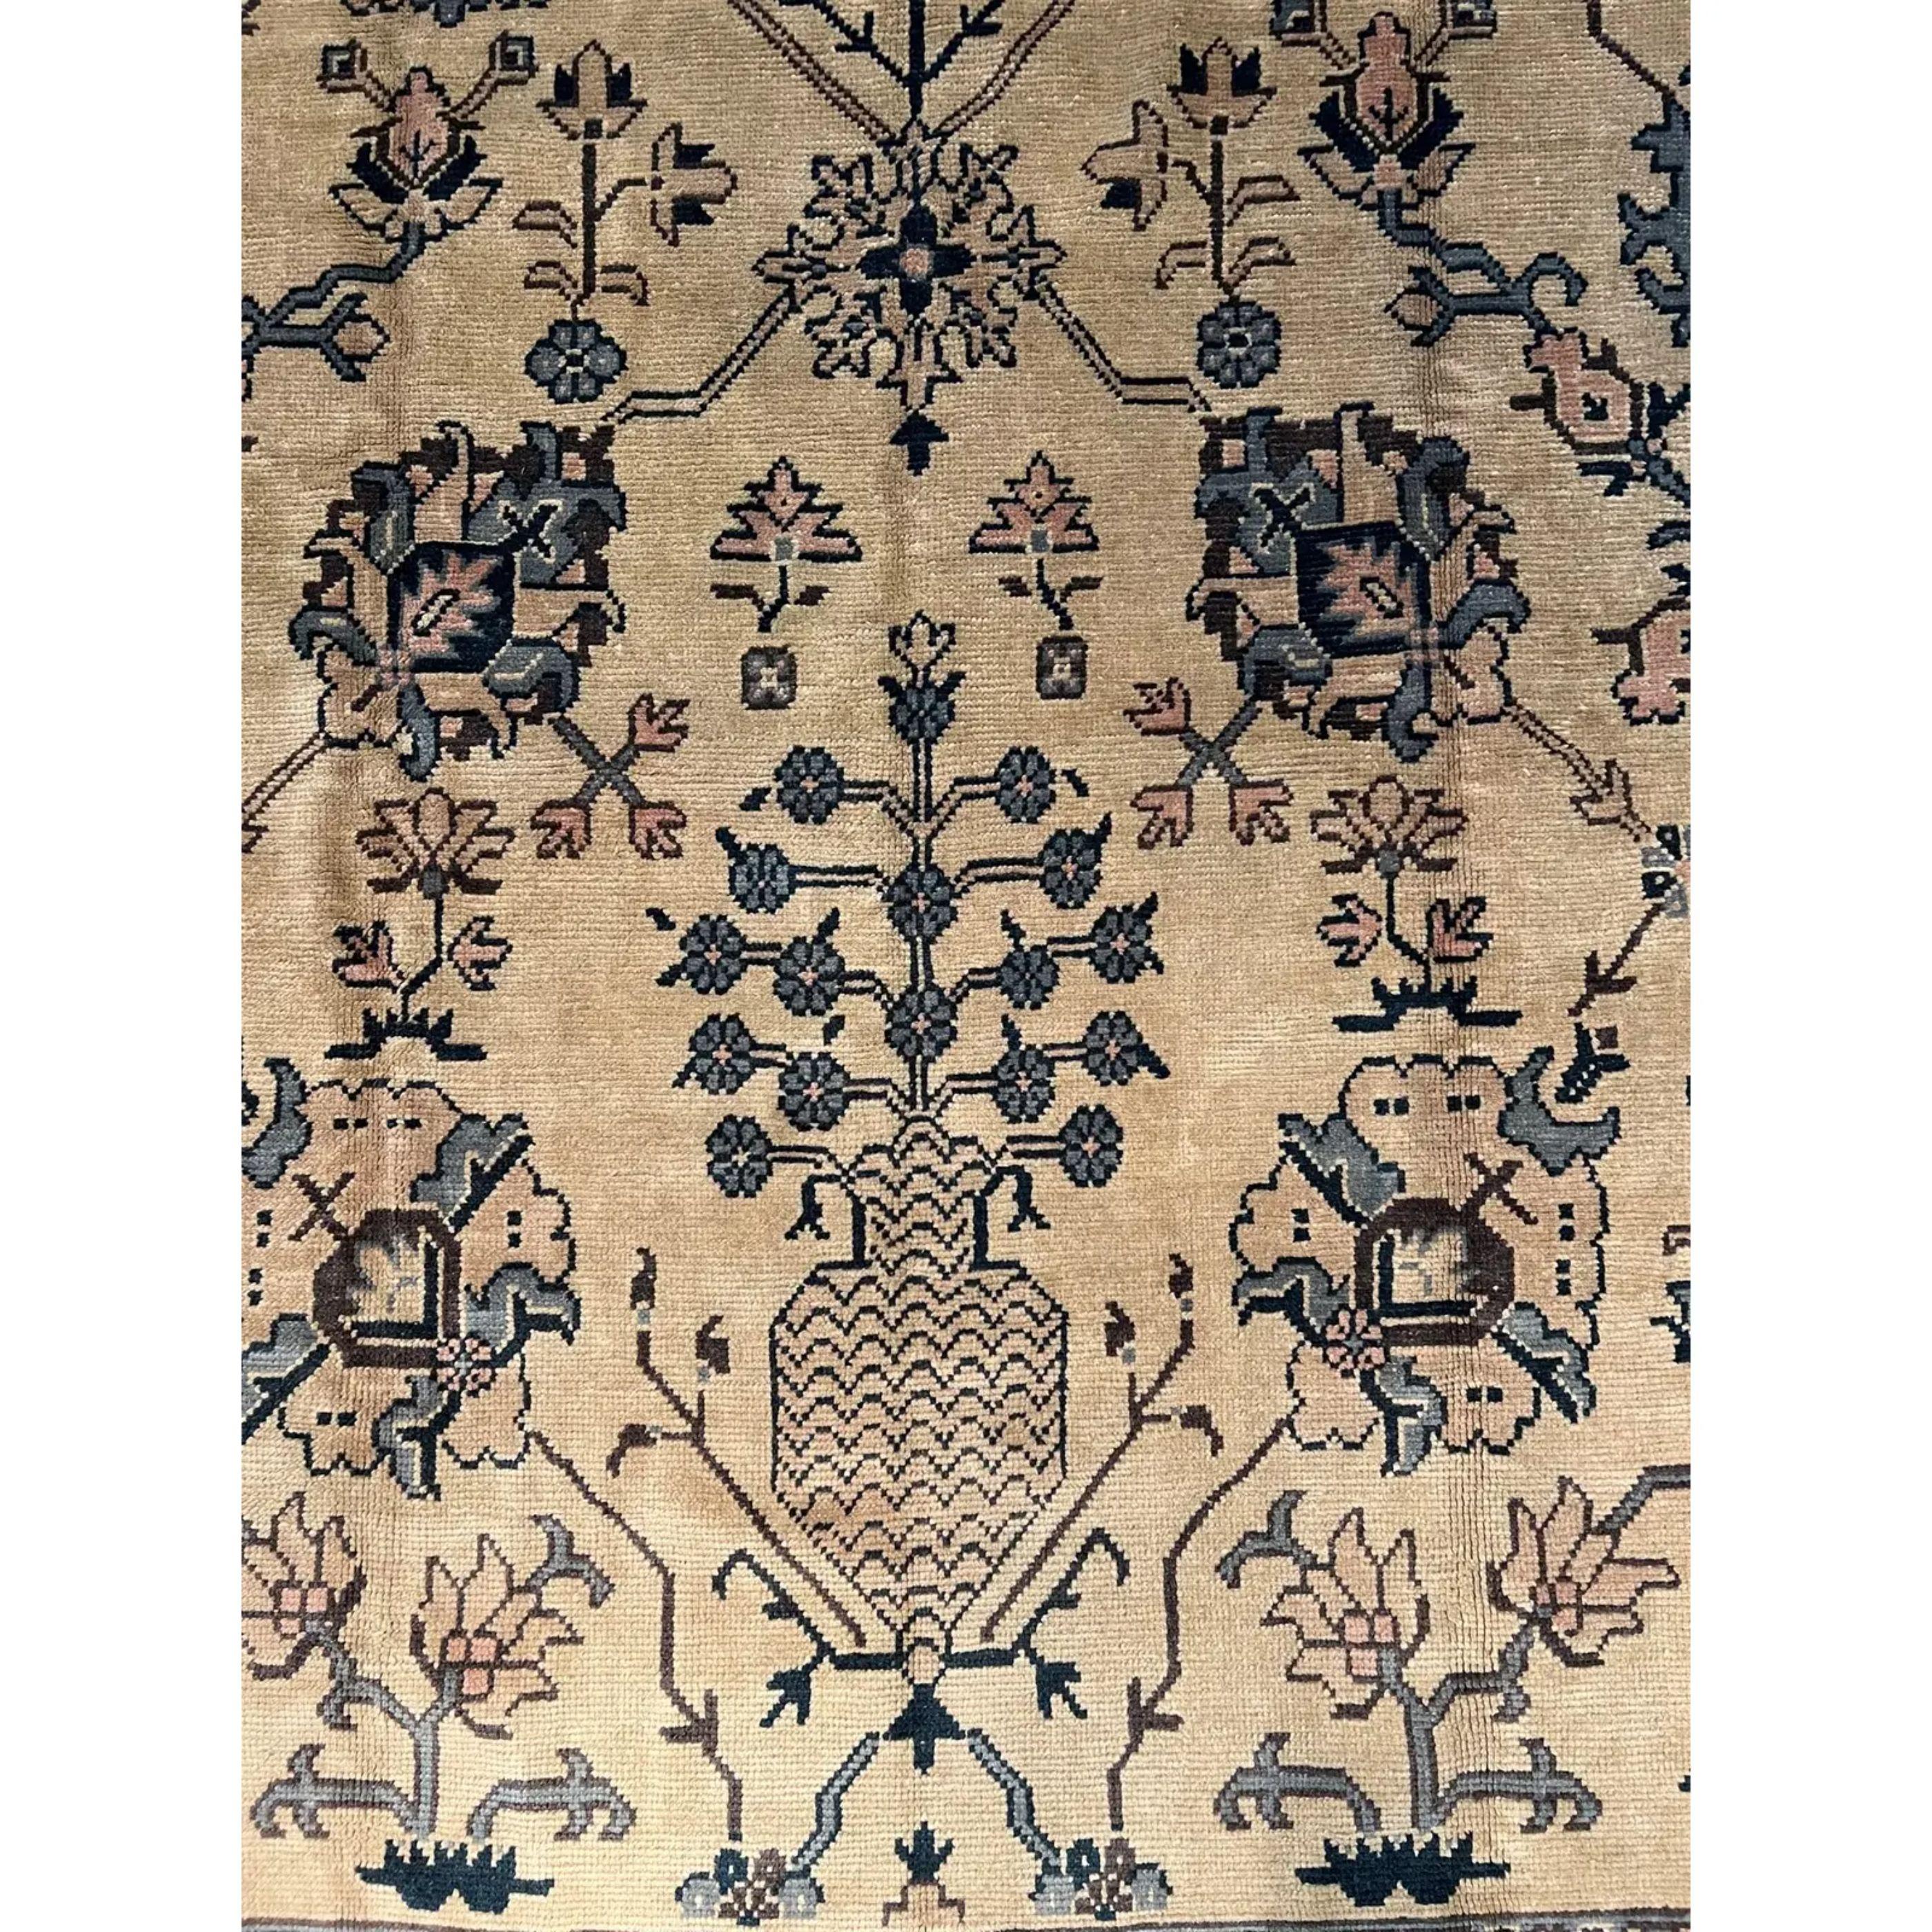 Antique Oushak Rug 9.3x9.0 In Good Condition For Sale In Los Angeles, US